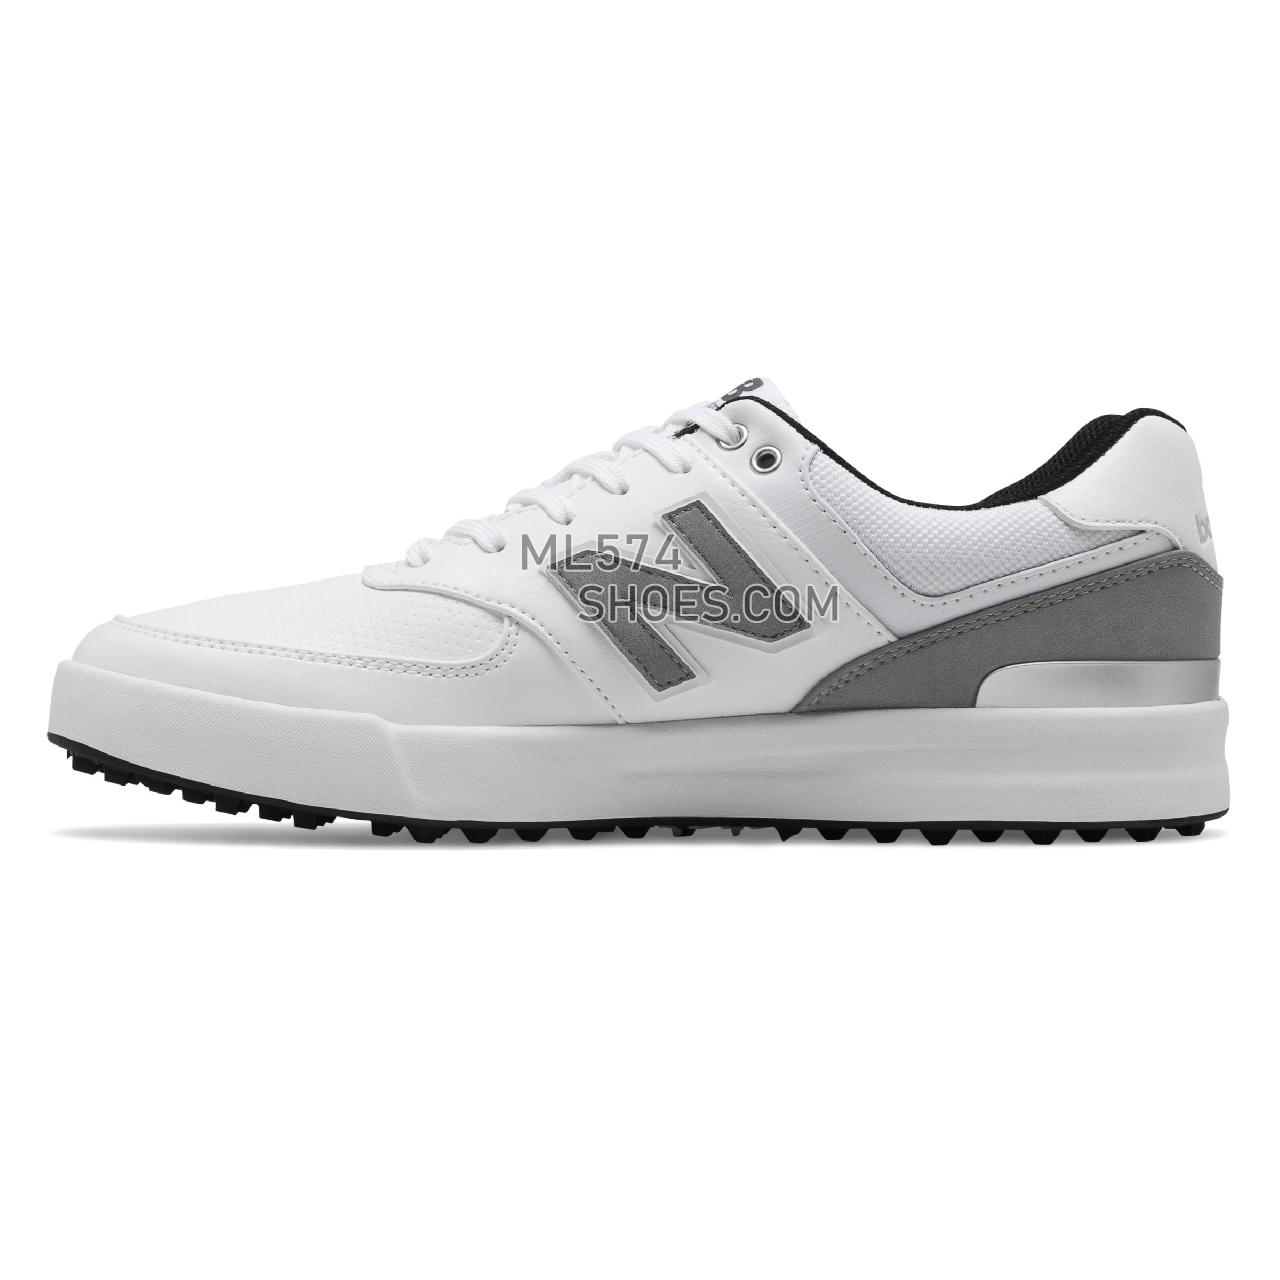 New Balance 574 Greens - Men's Golf - White with Grey - NBG574GWT